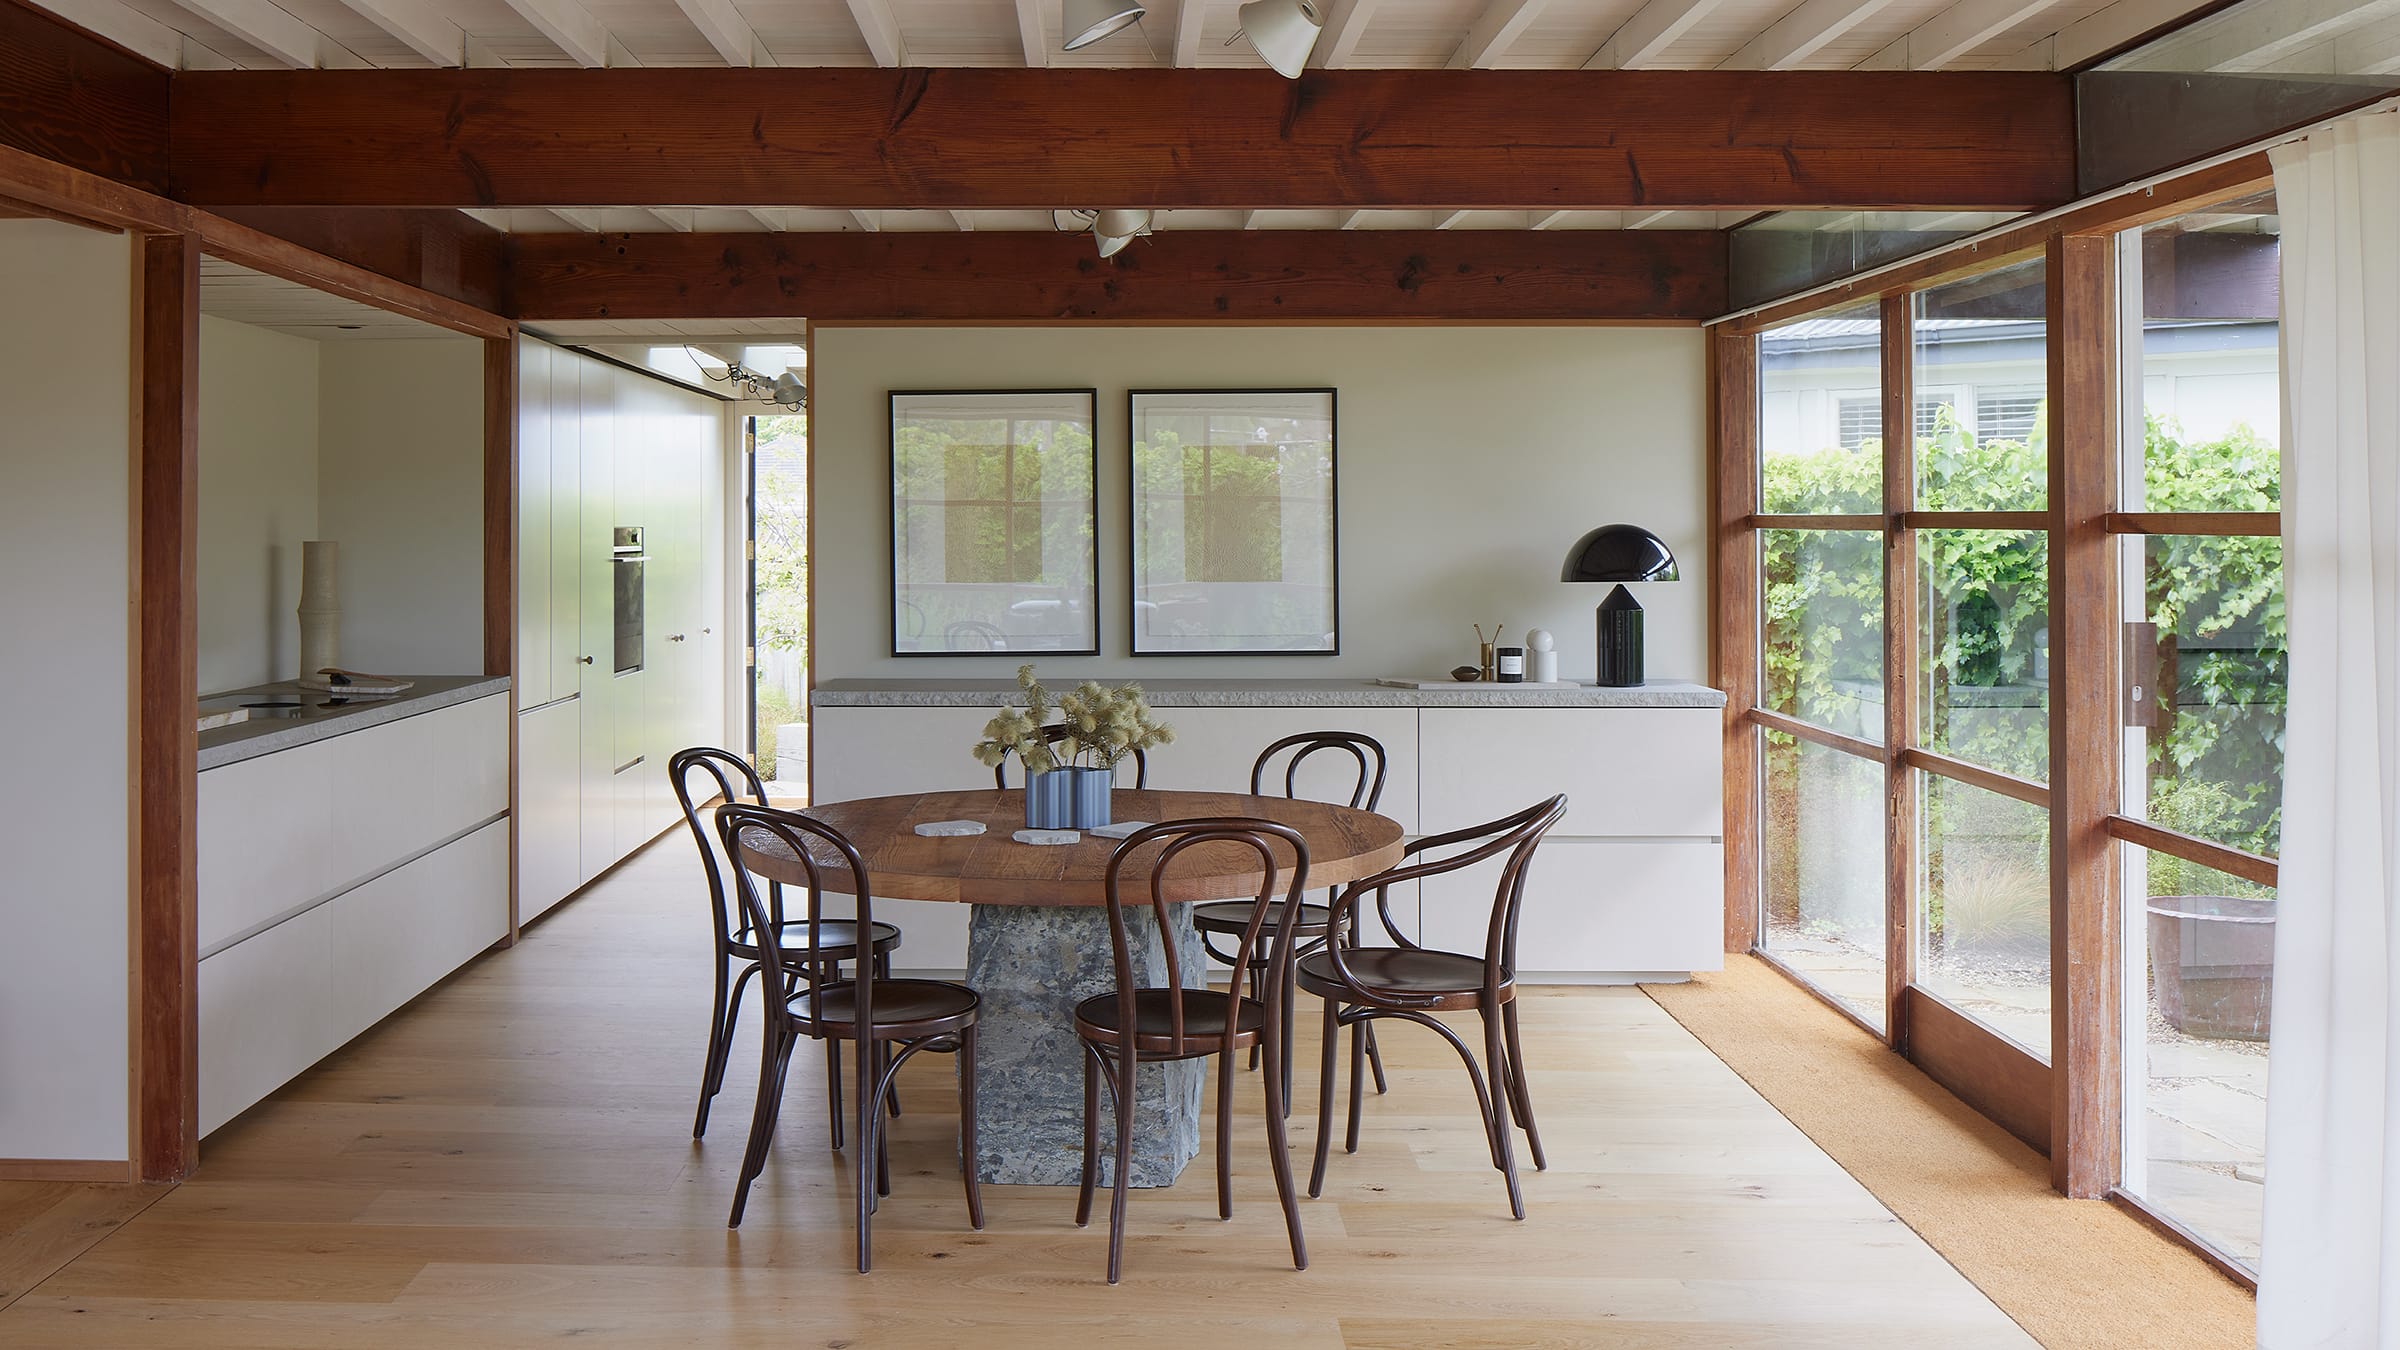 The dining room, showcasing the timber structure